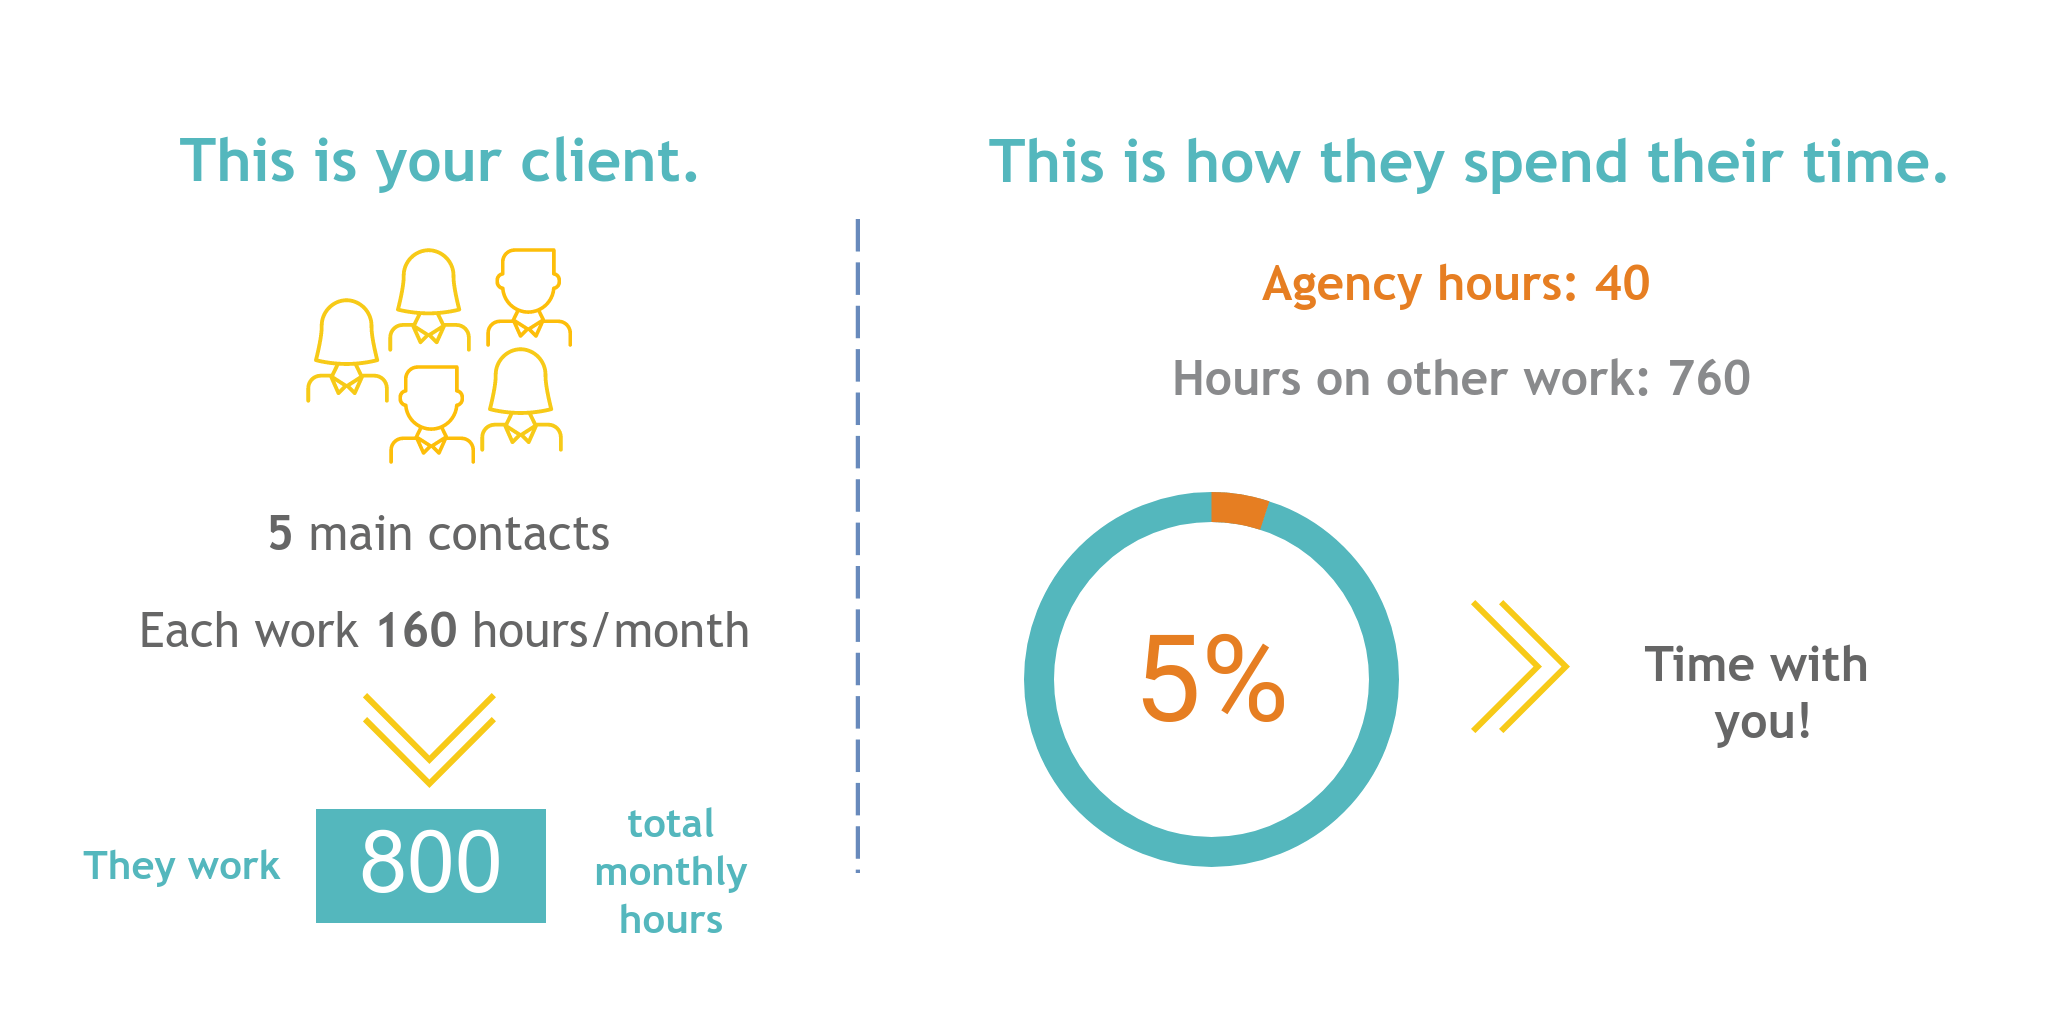 5% of Your Client's Time is You (the Agency)